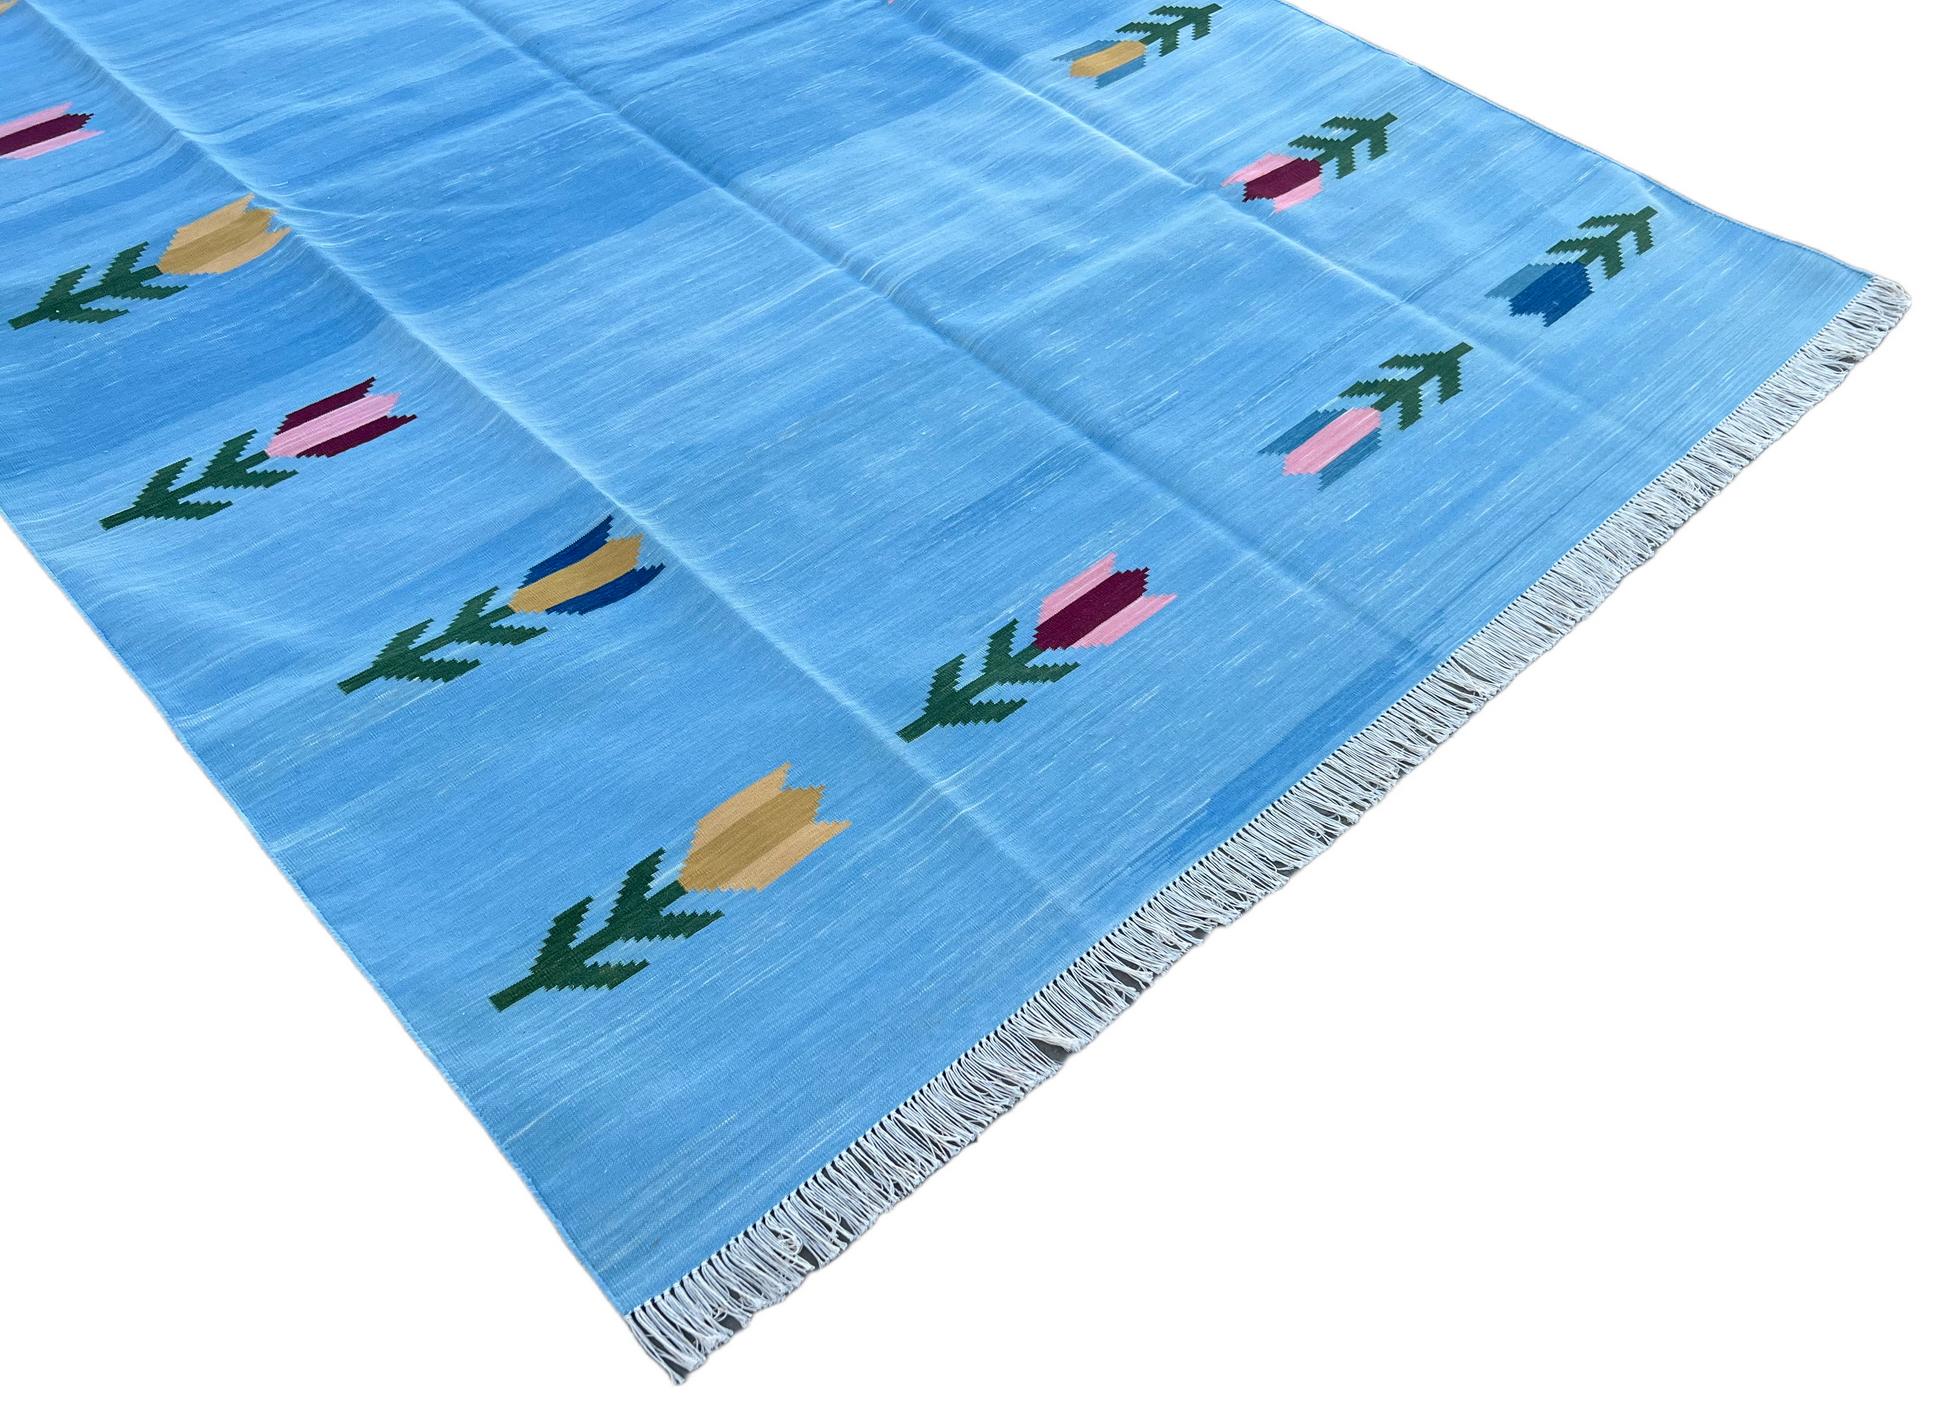 Contemporary Handmade Cotton Area Flat Weave Rug, Sky Blue & Red Leaf Pattern Indian Dhurrie For Sale